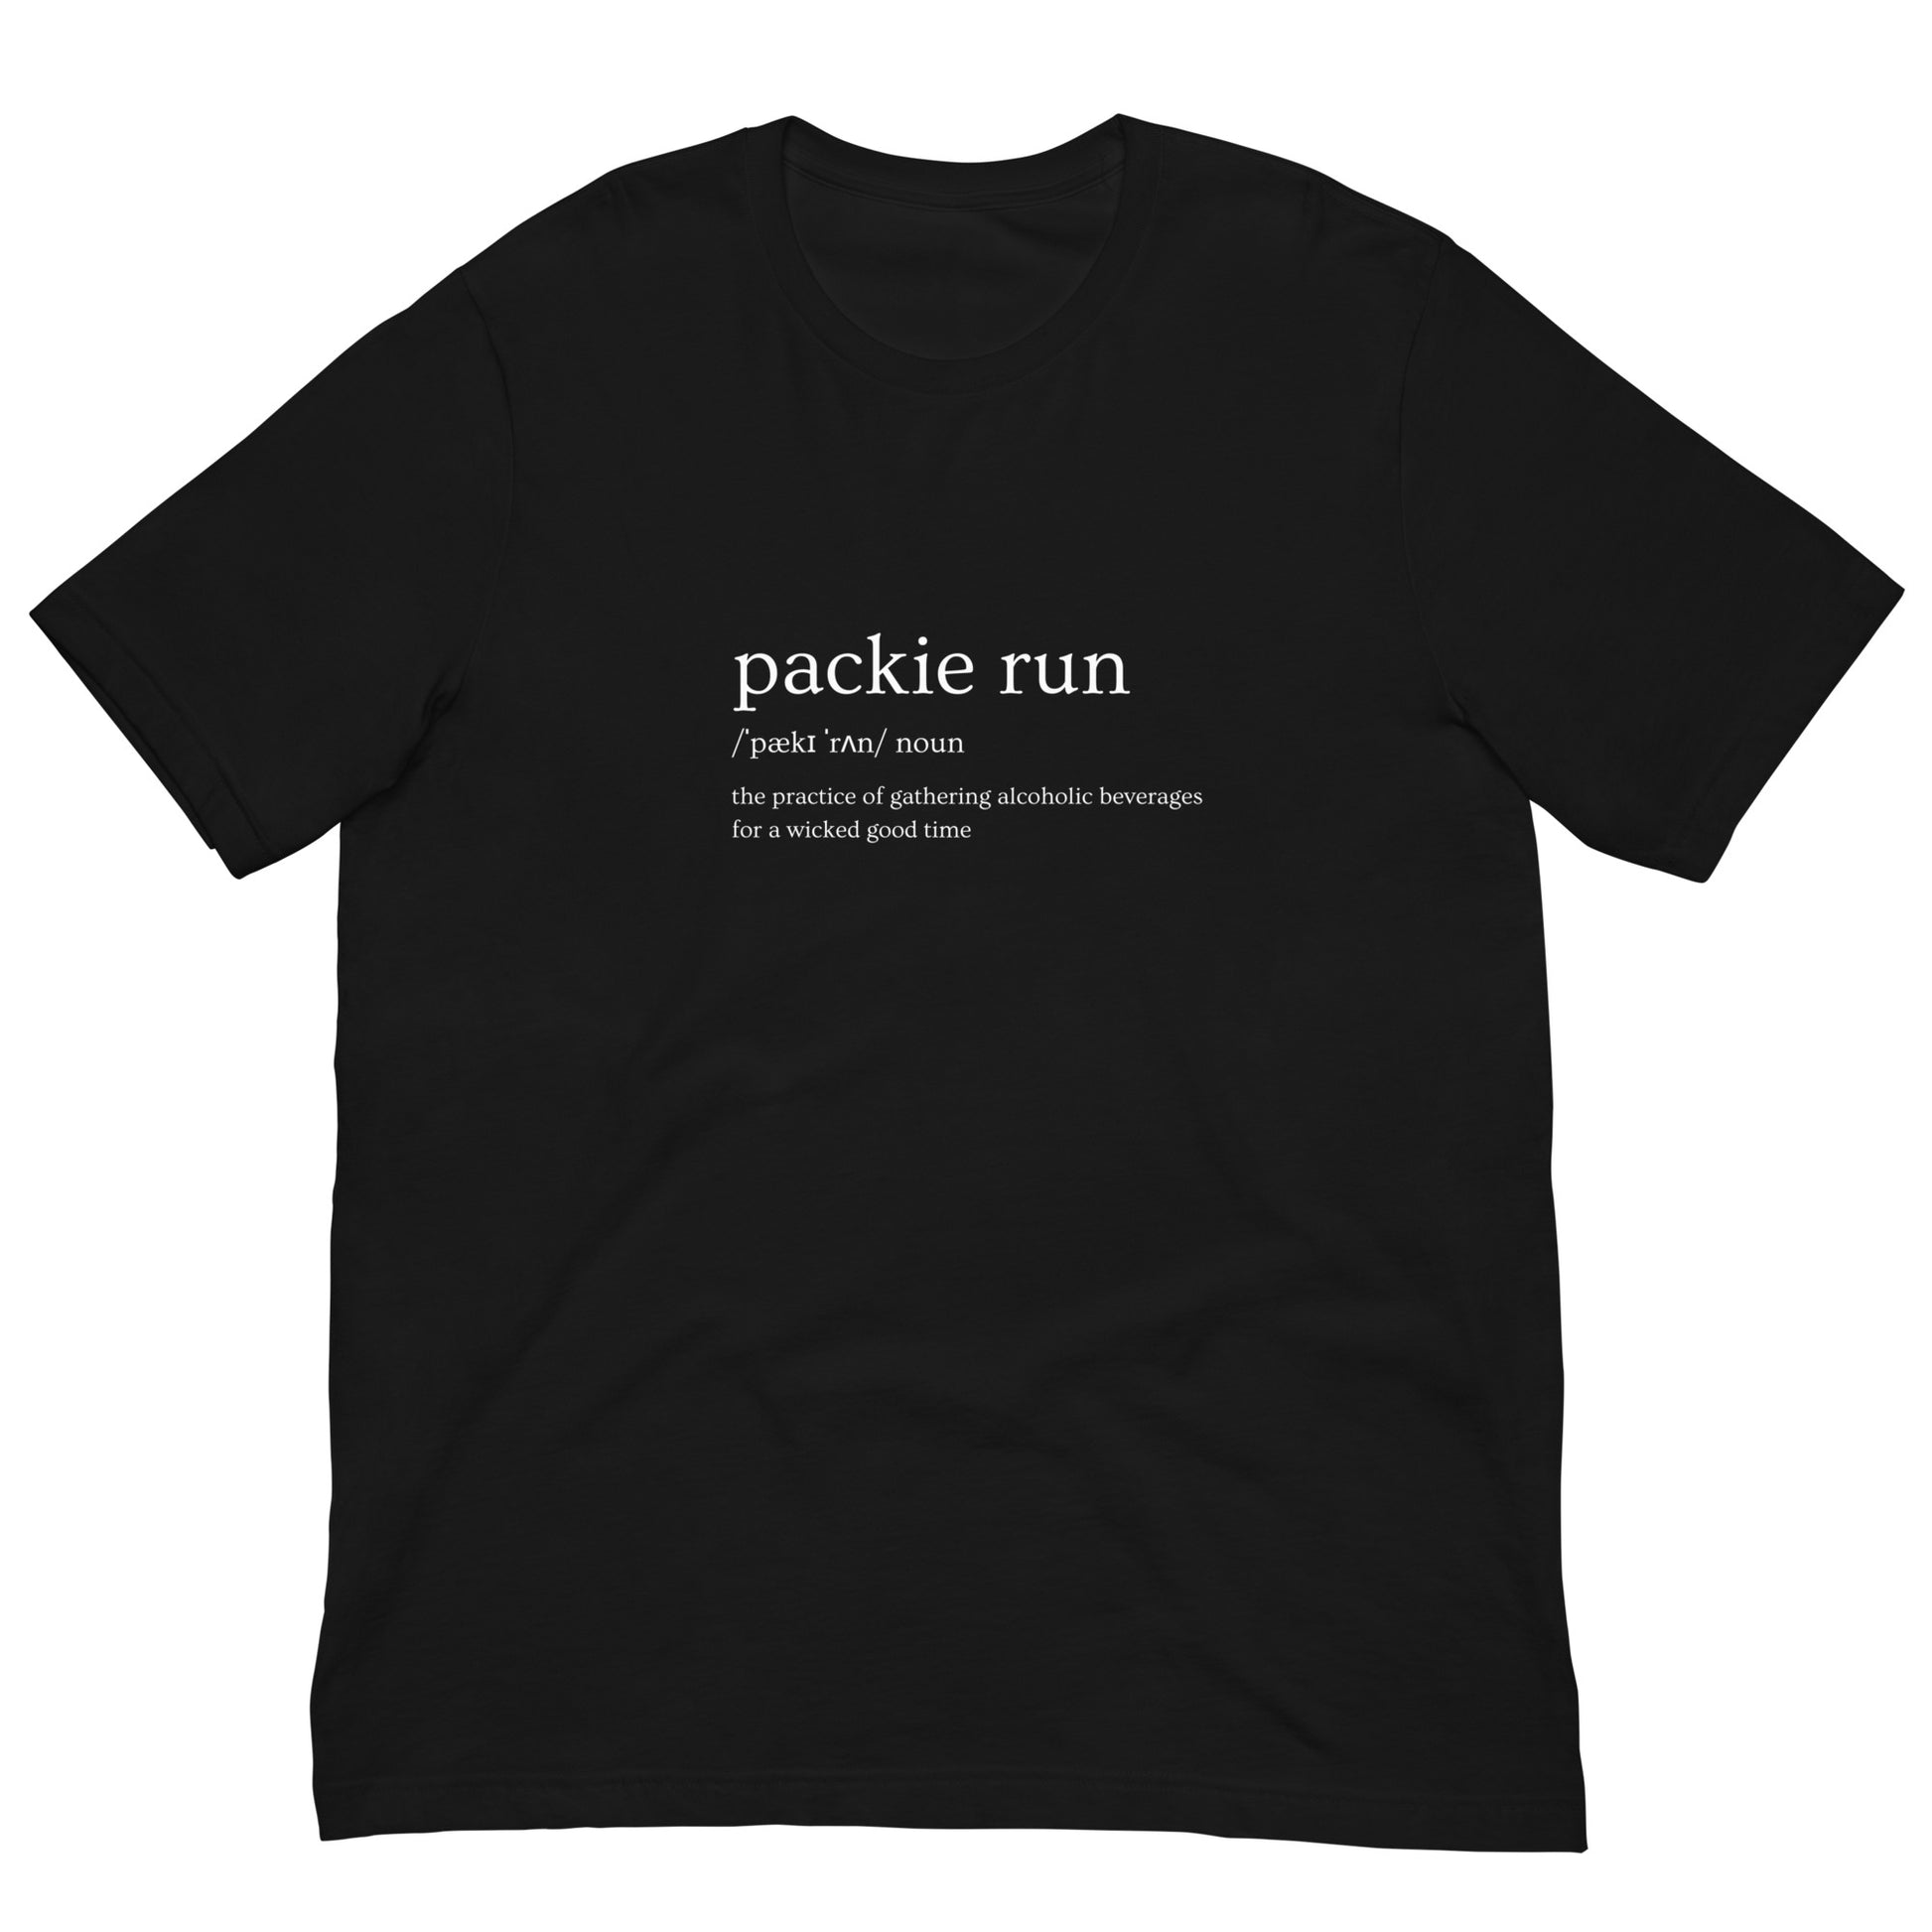 black tshirt that says "packie run, noun, the practice of gathering alcoholic beverages for a wicked good time"